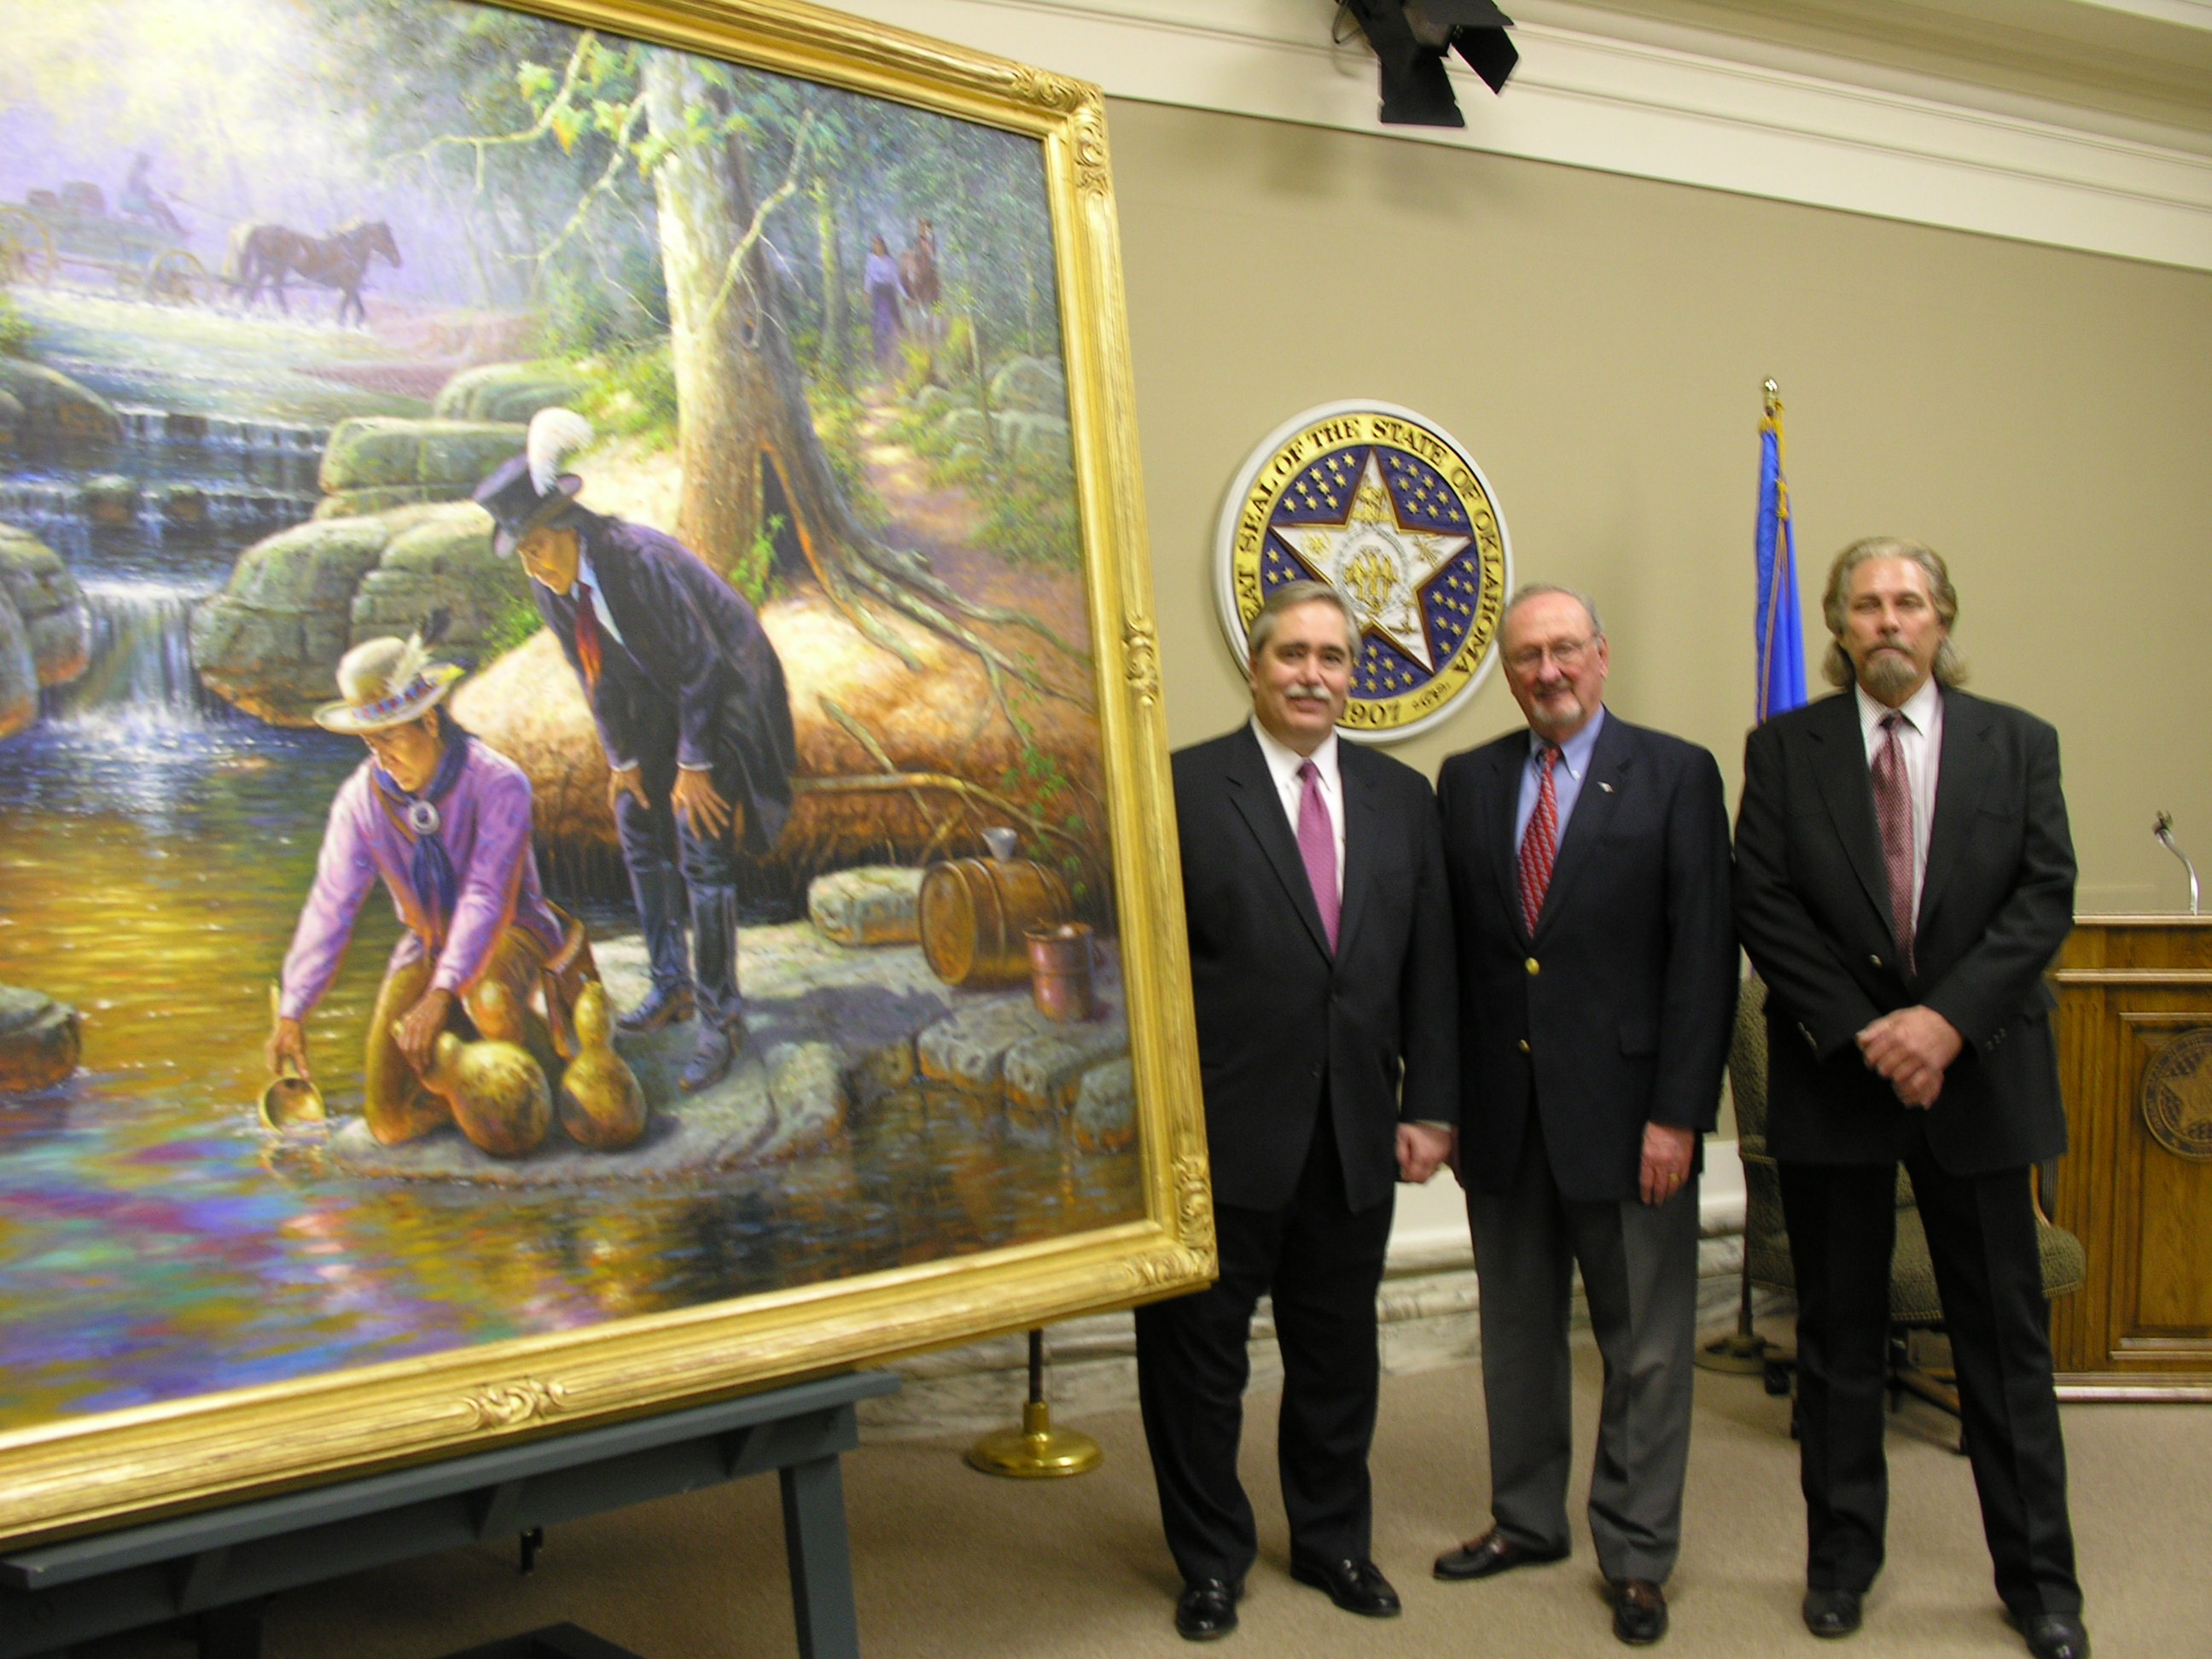 President, Chairman and CEO of ONEOK David Kyle, Charles Ford and artist Wayne Cooper.